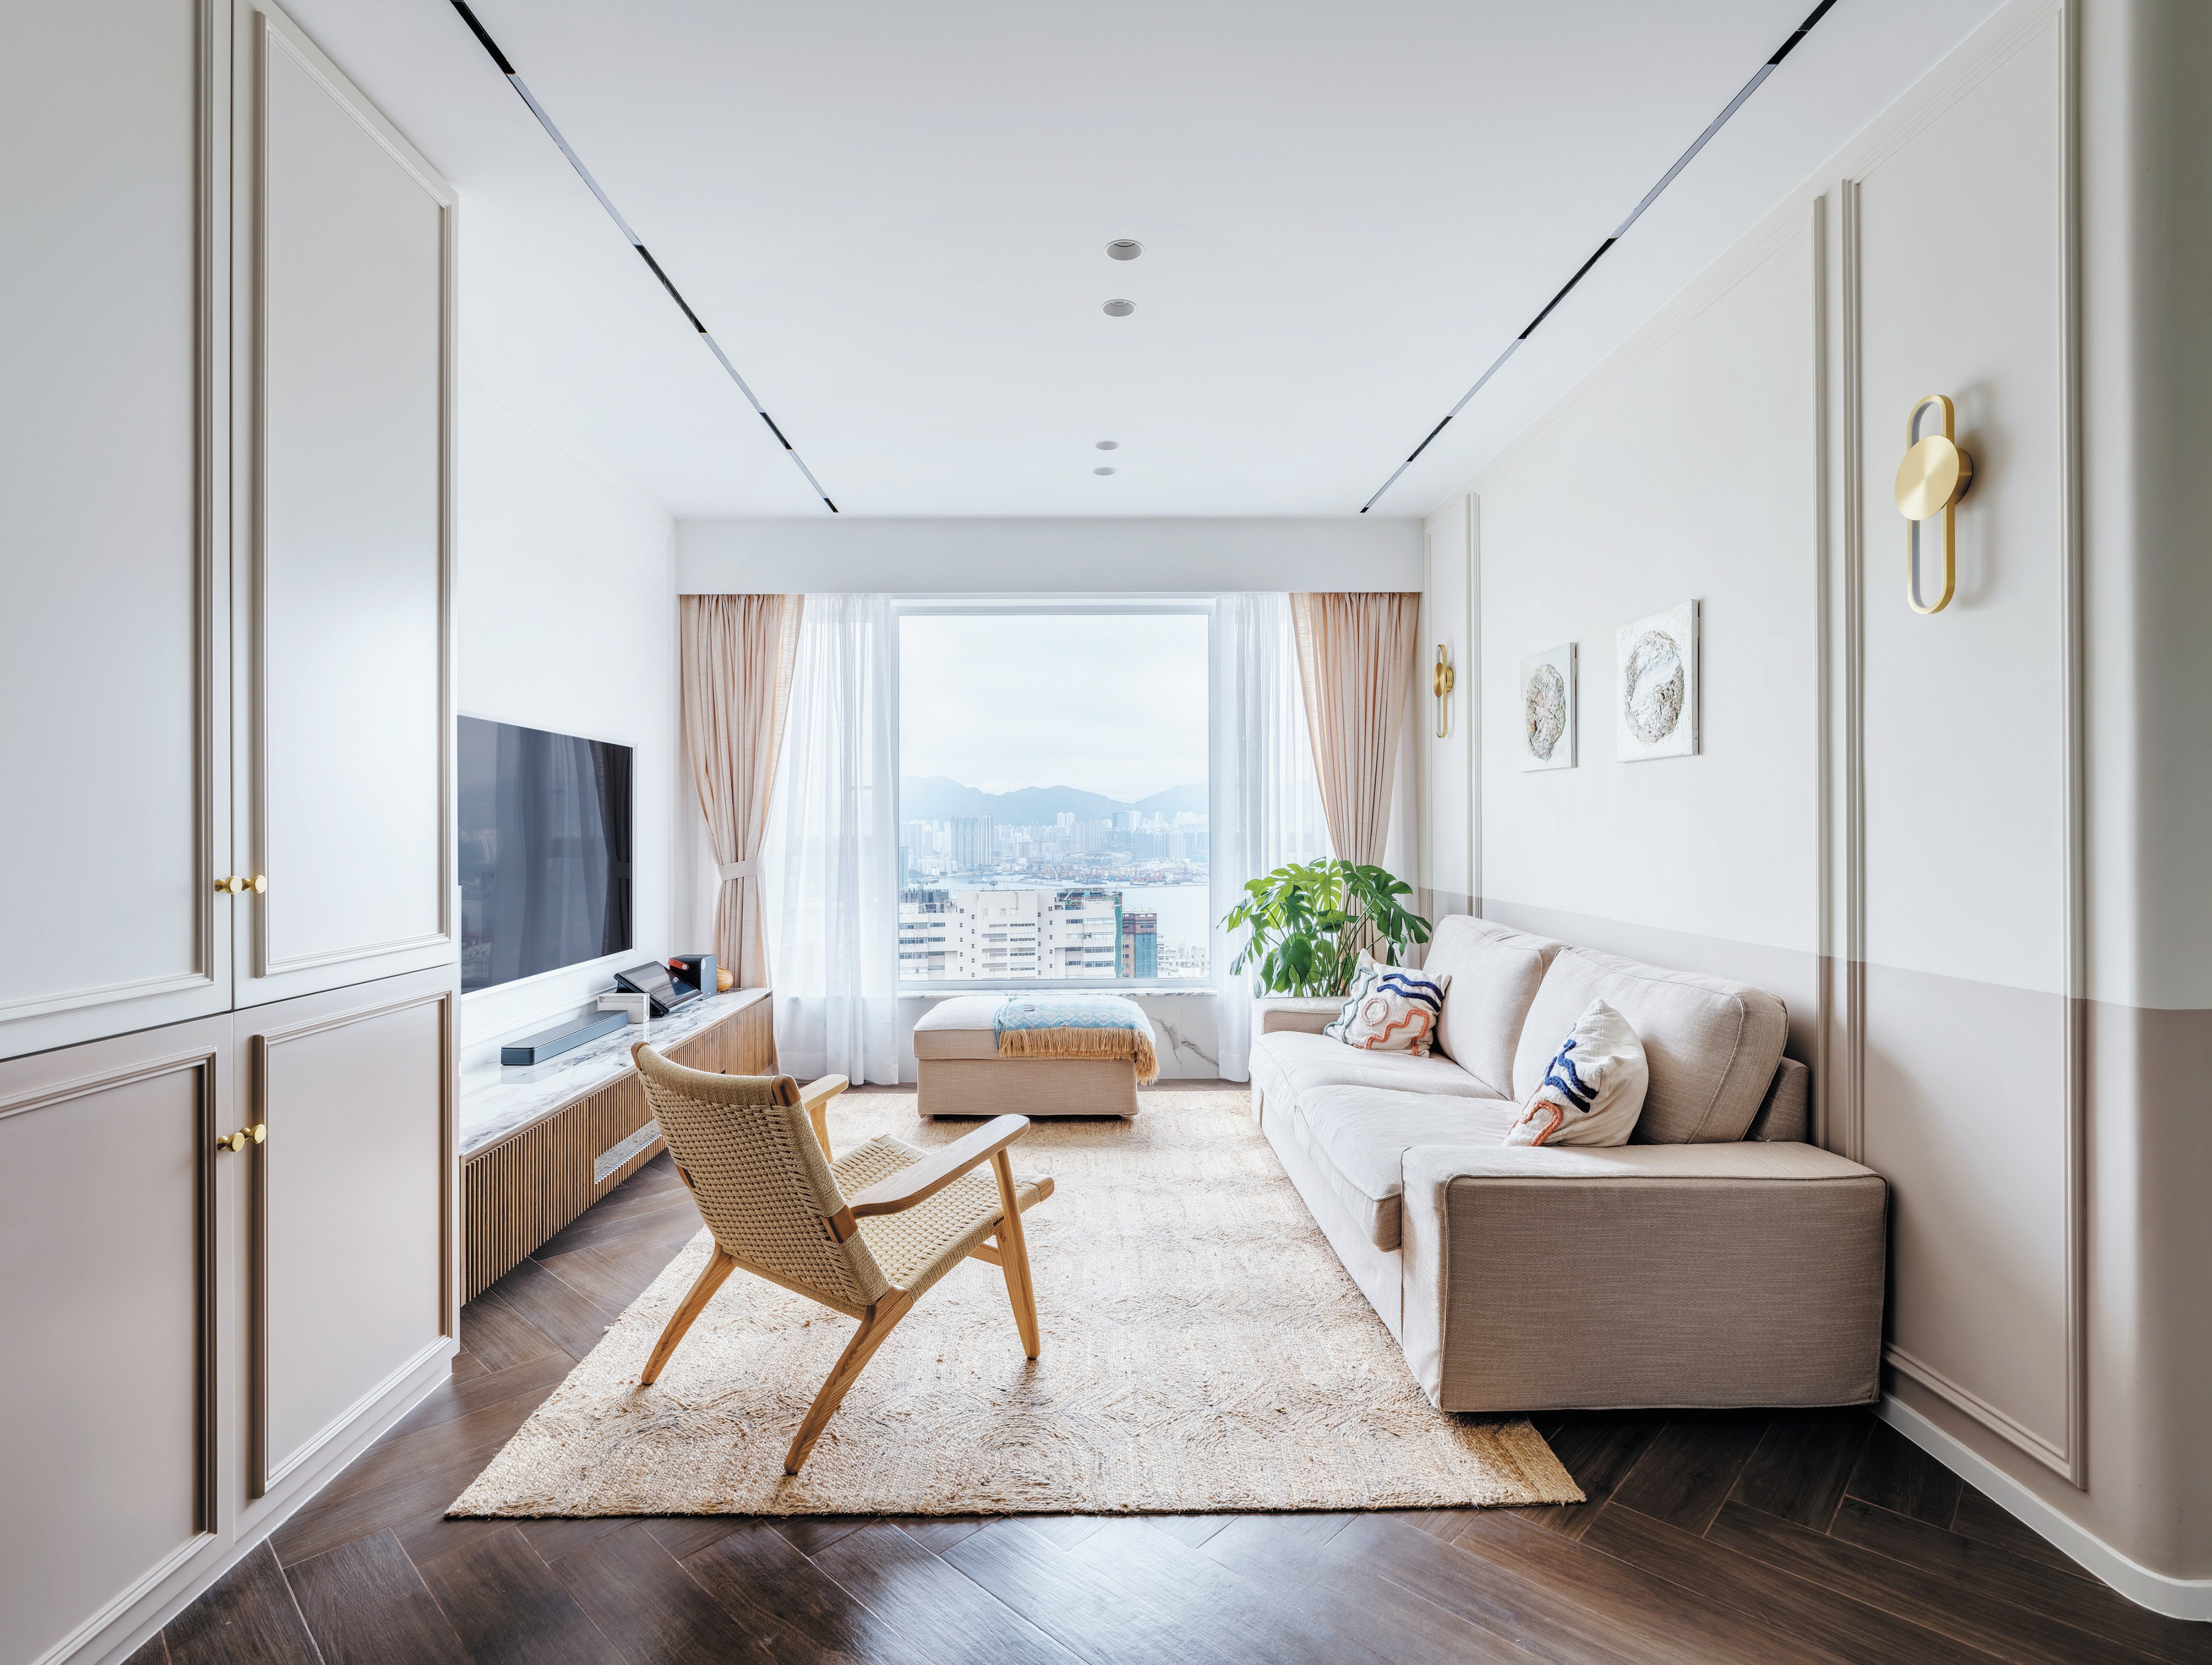 The living room of an apartment in Tin Hau, Hong Kong, that is home to a family of five. A designer demolished everything in the 50-year-old flat to create a home with mid-century modern vibes. Photo: Steven Ko 